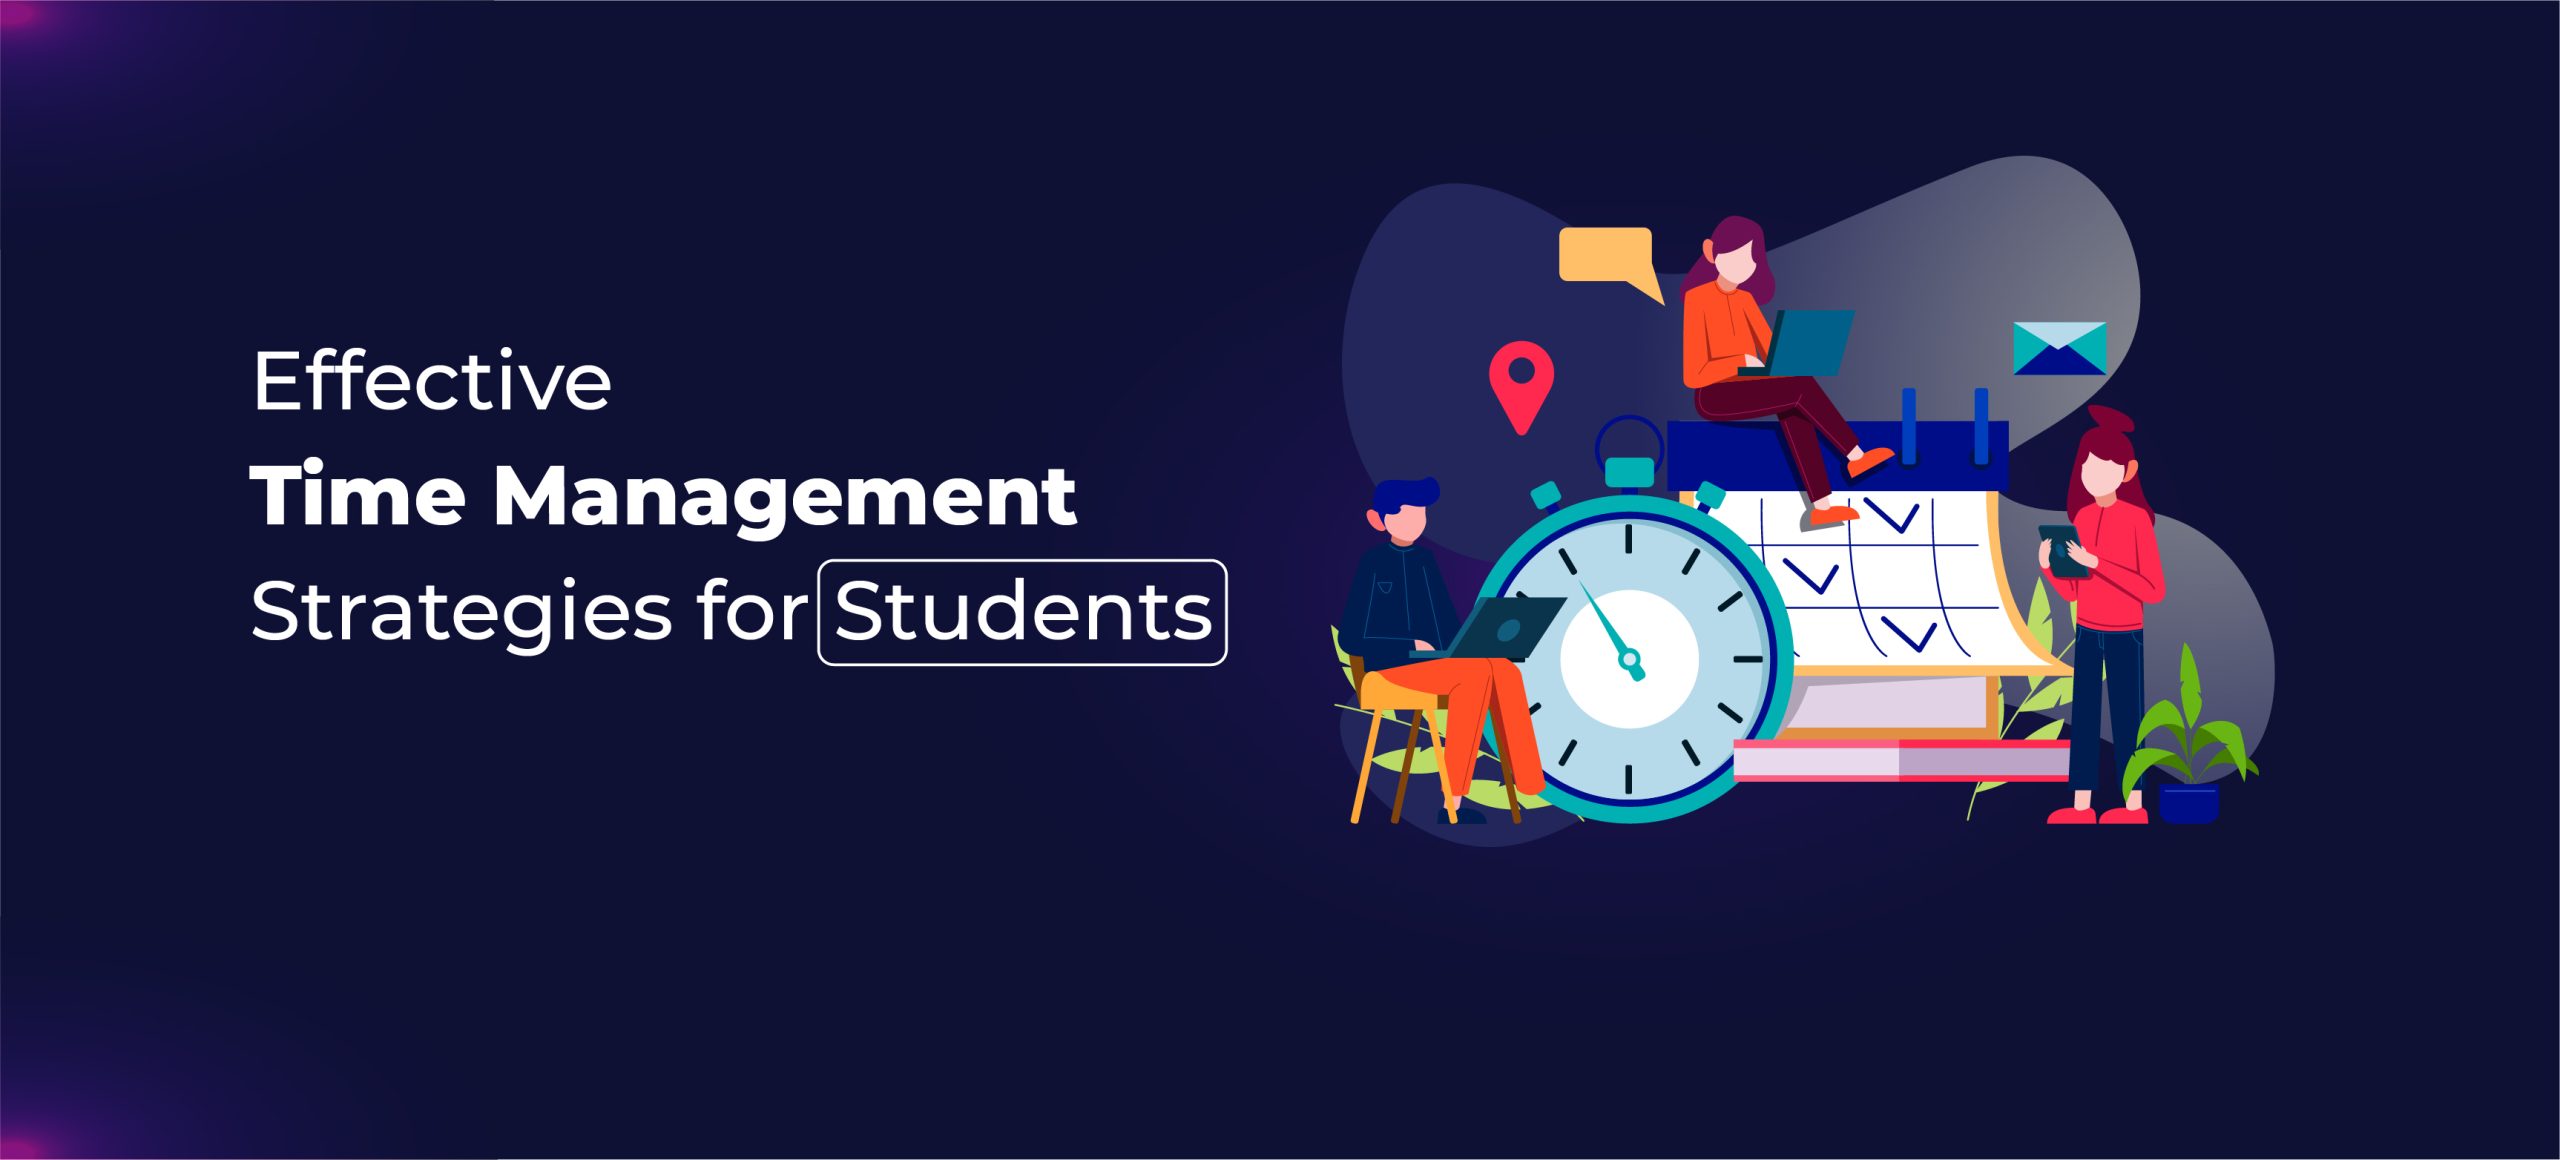 Effective Time Management Strategies for Students